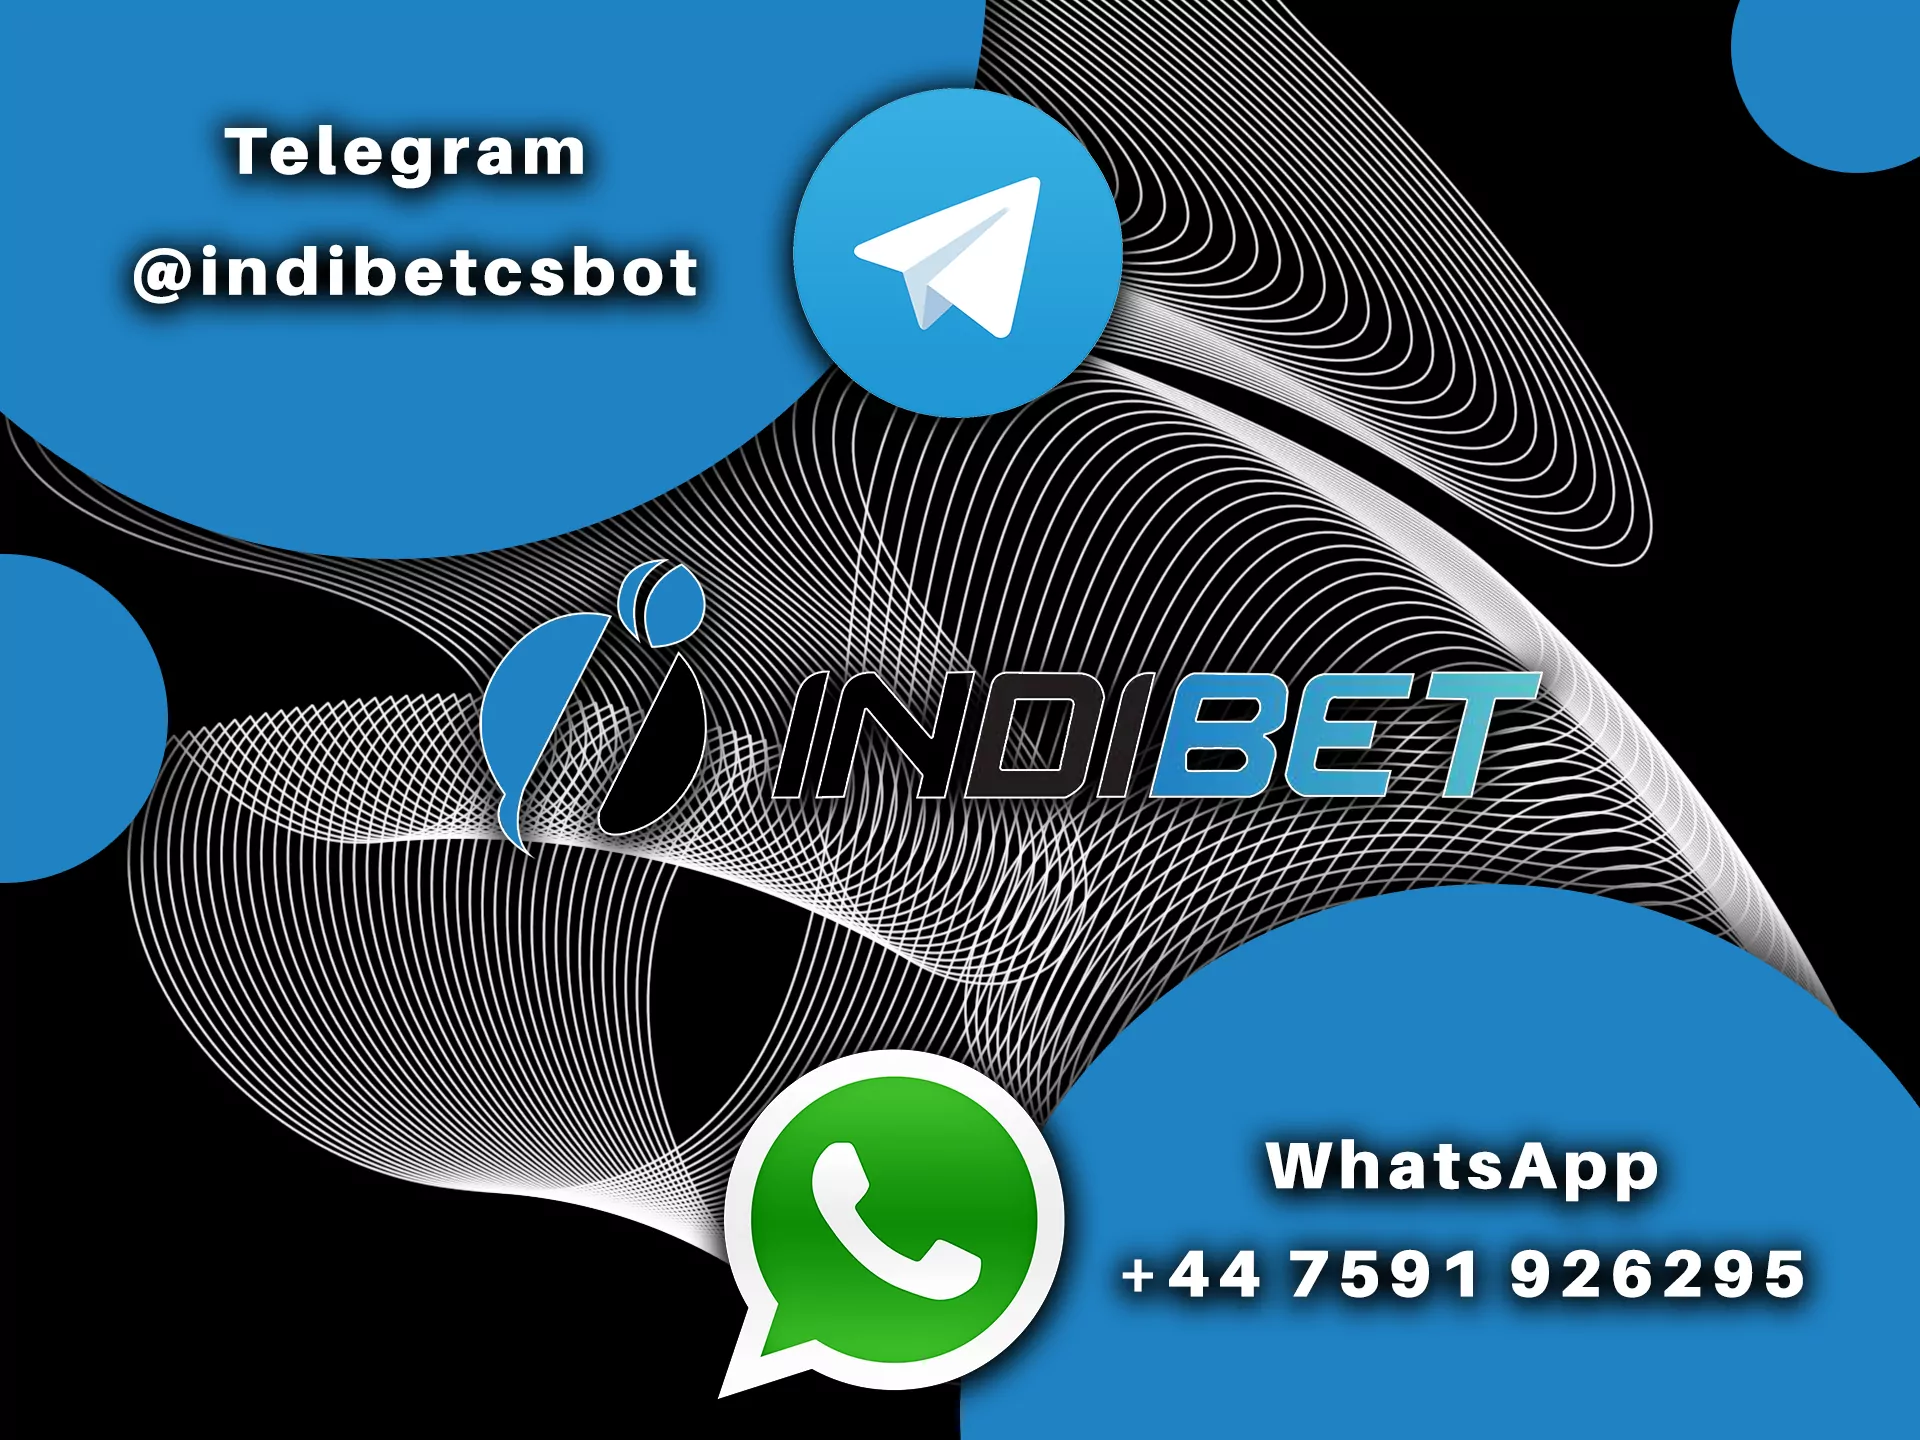 You can also contact the Indibet support team in your favorite messengers.